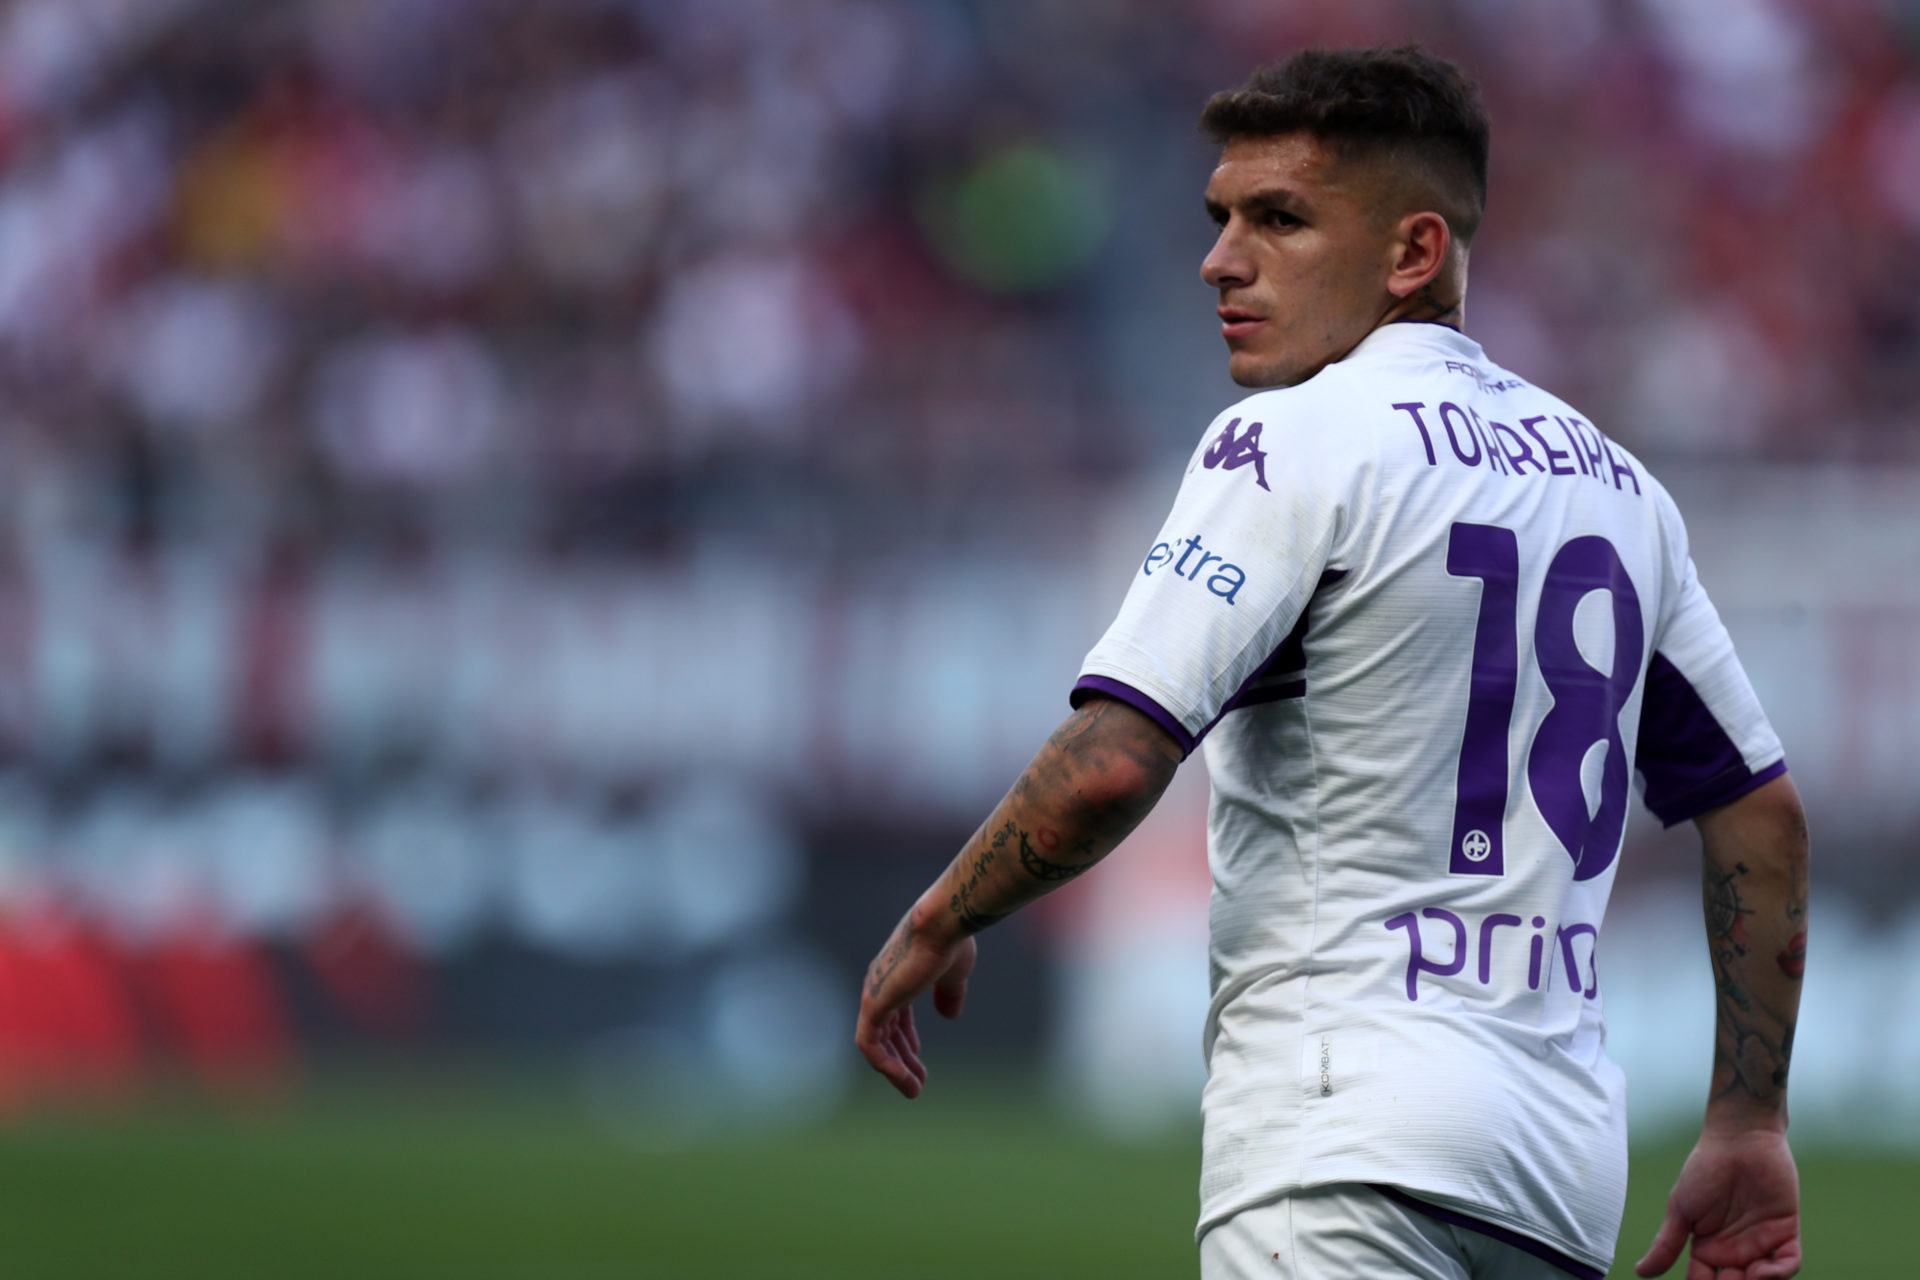 Torreira has accepted Galatasaray move